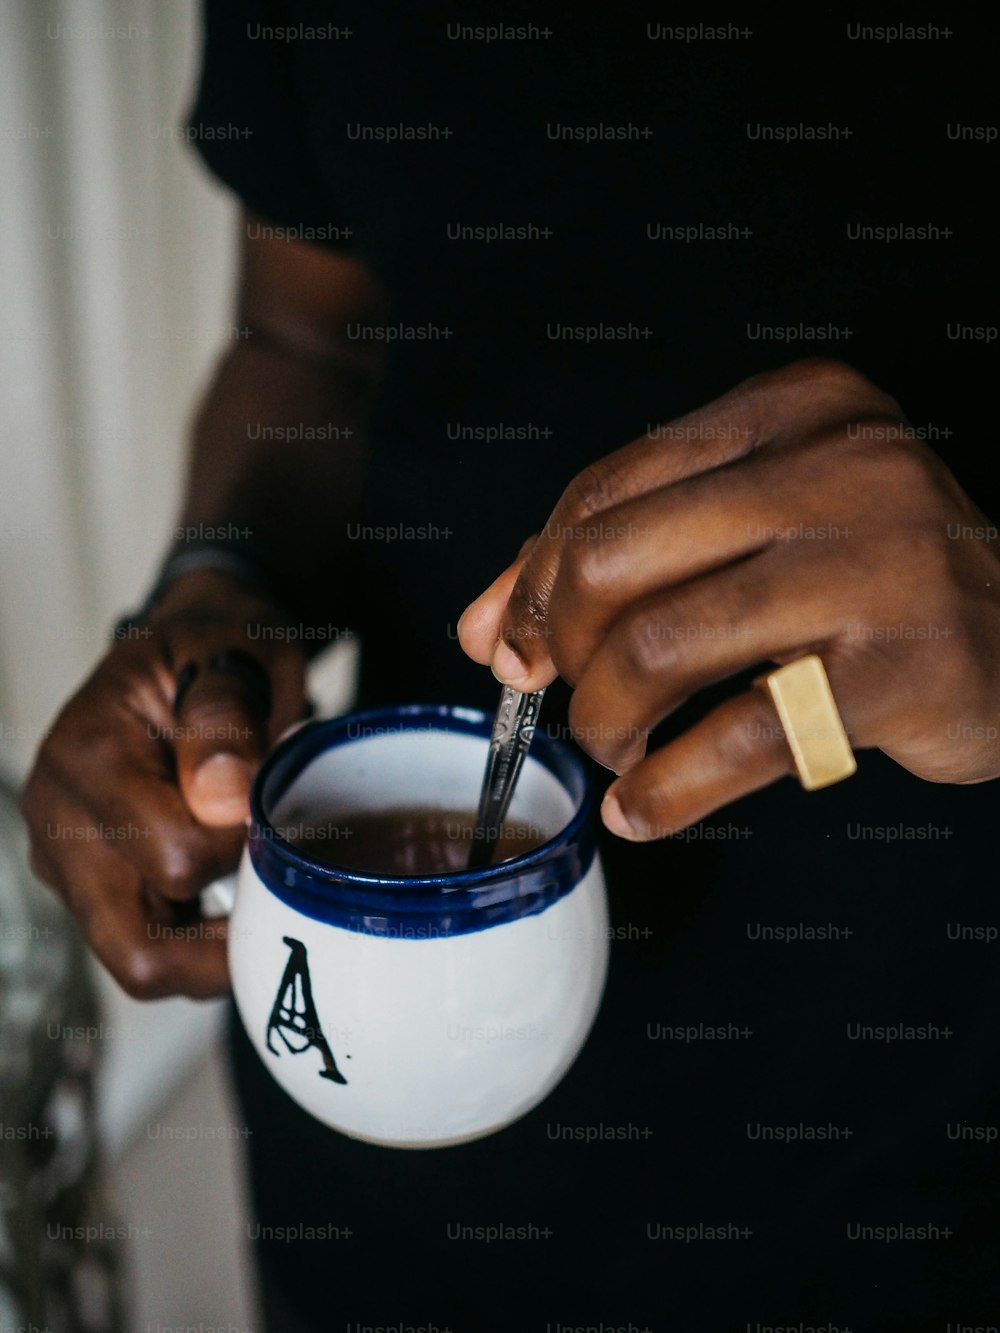 Hand And Cup Of Coffee Set In Linear Style Vector Stock Illustration -  Download Image Now - iStock